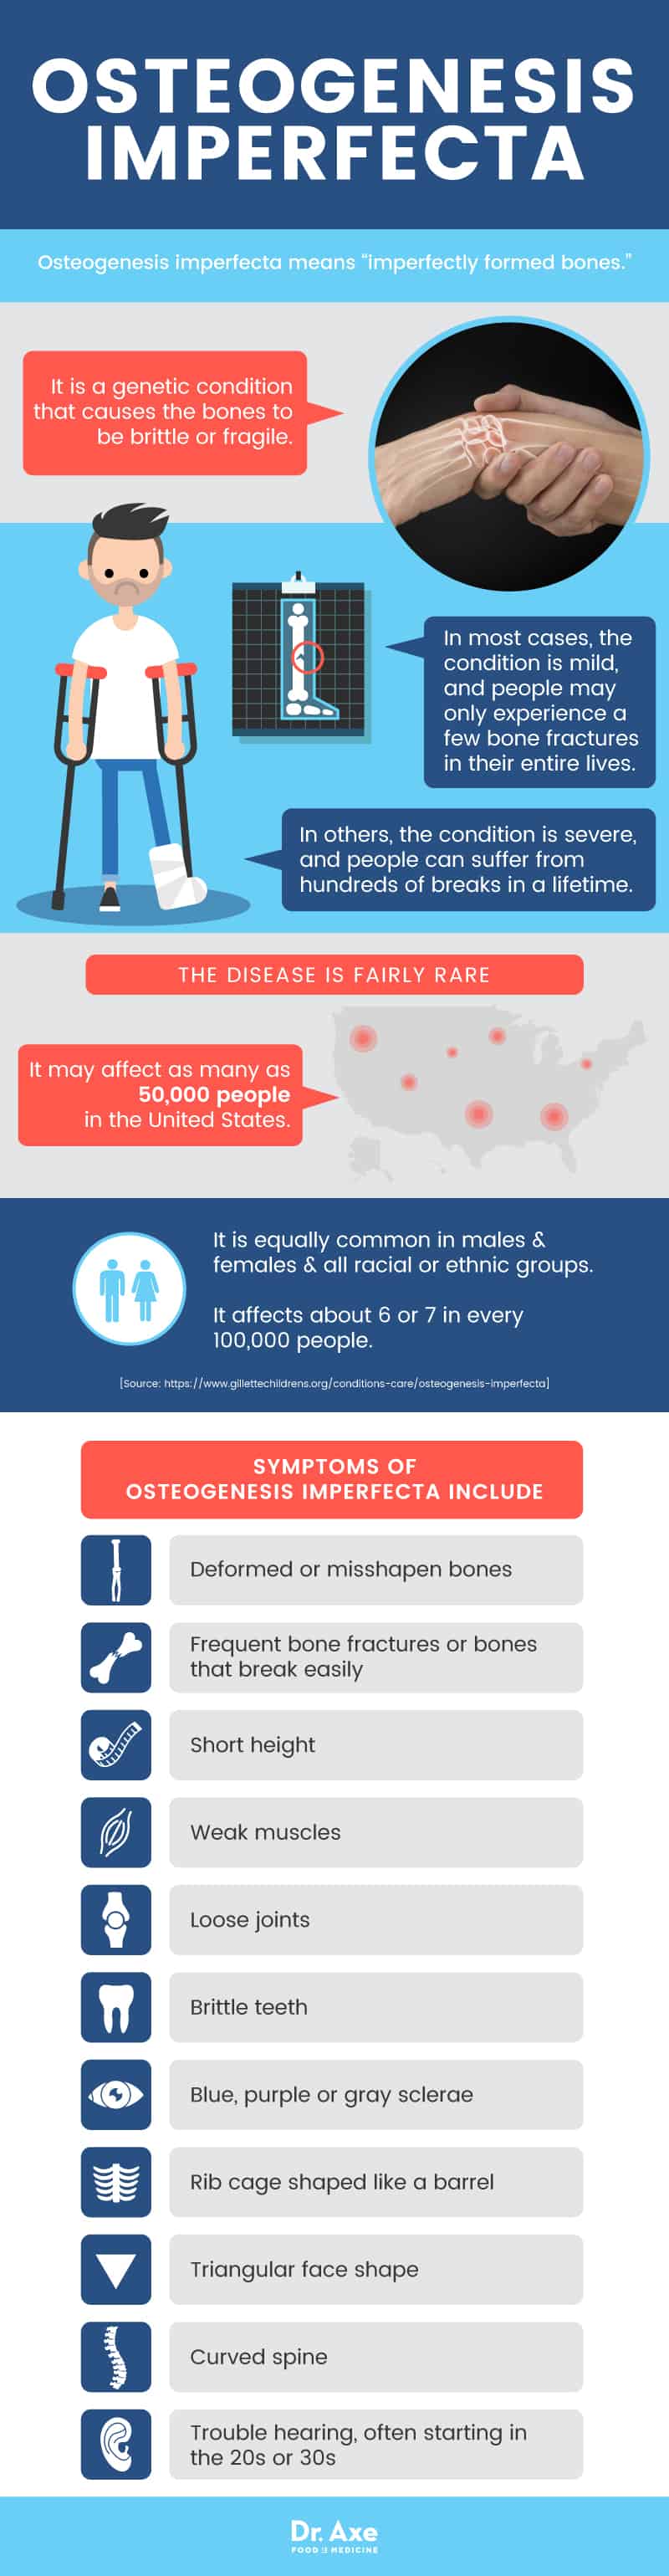 Osteogenesis imperfecta facts - Dr. Axe